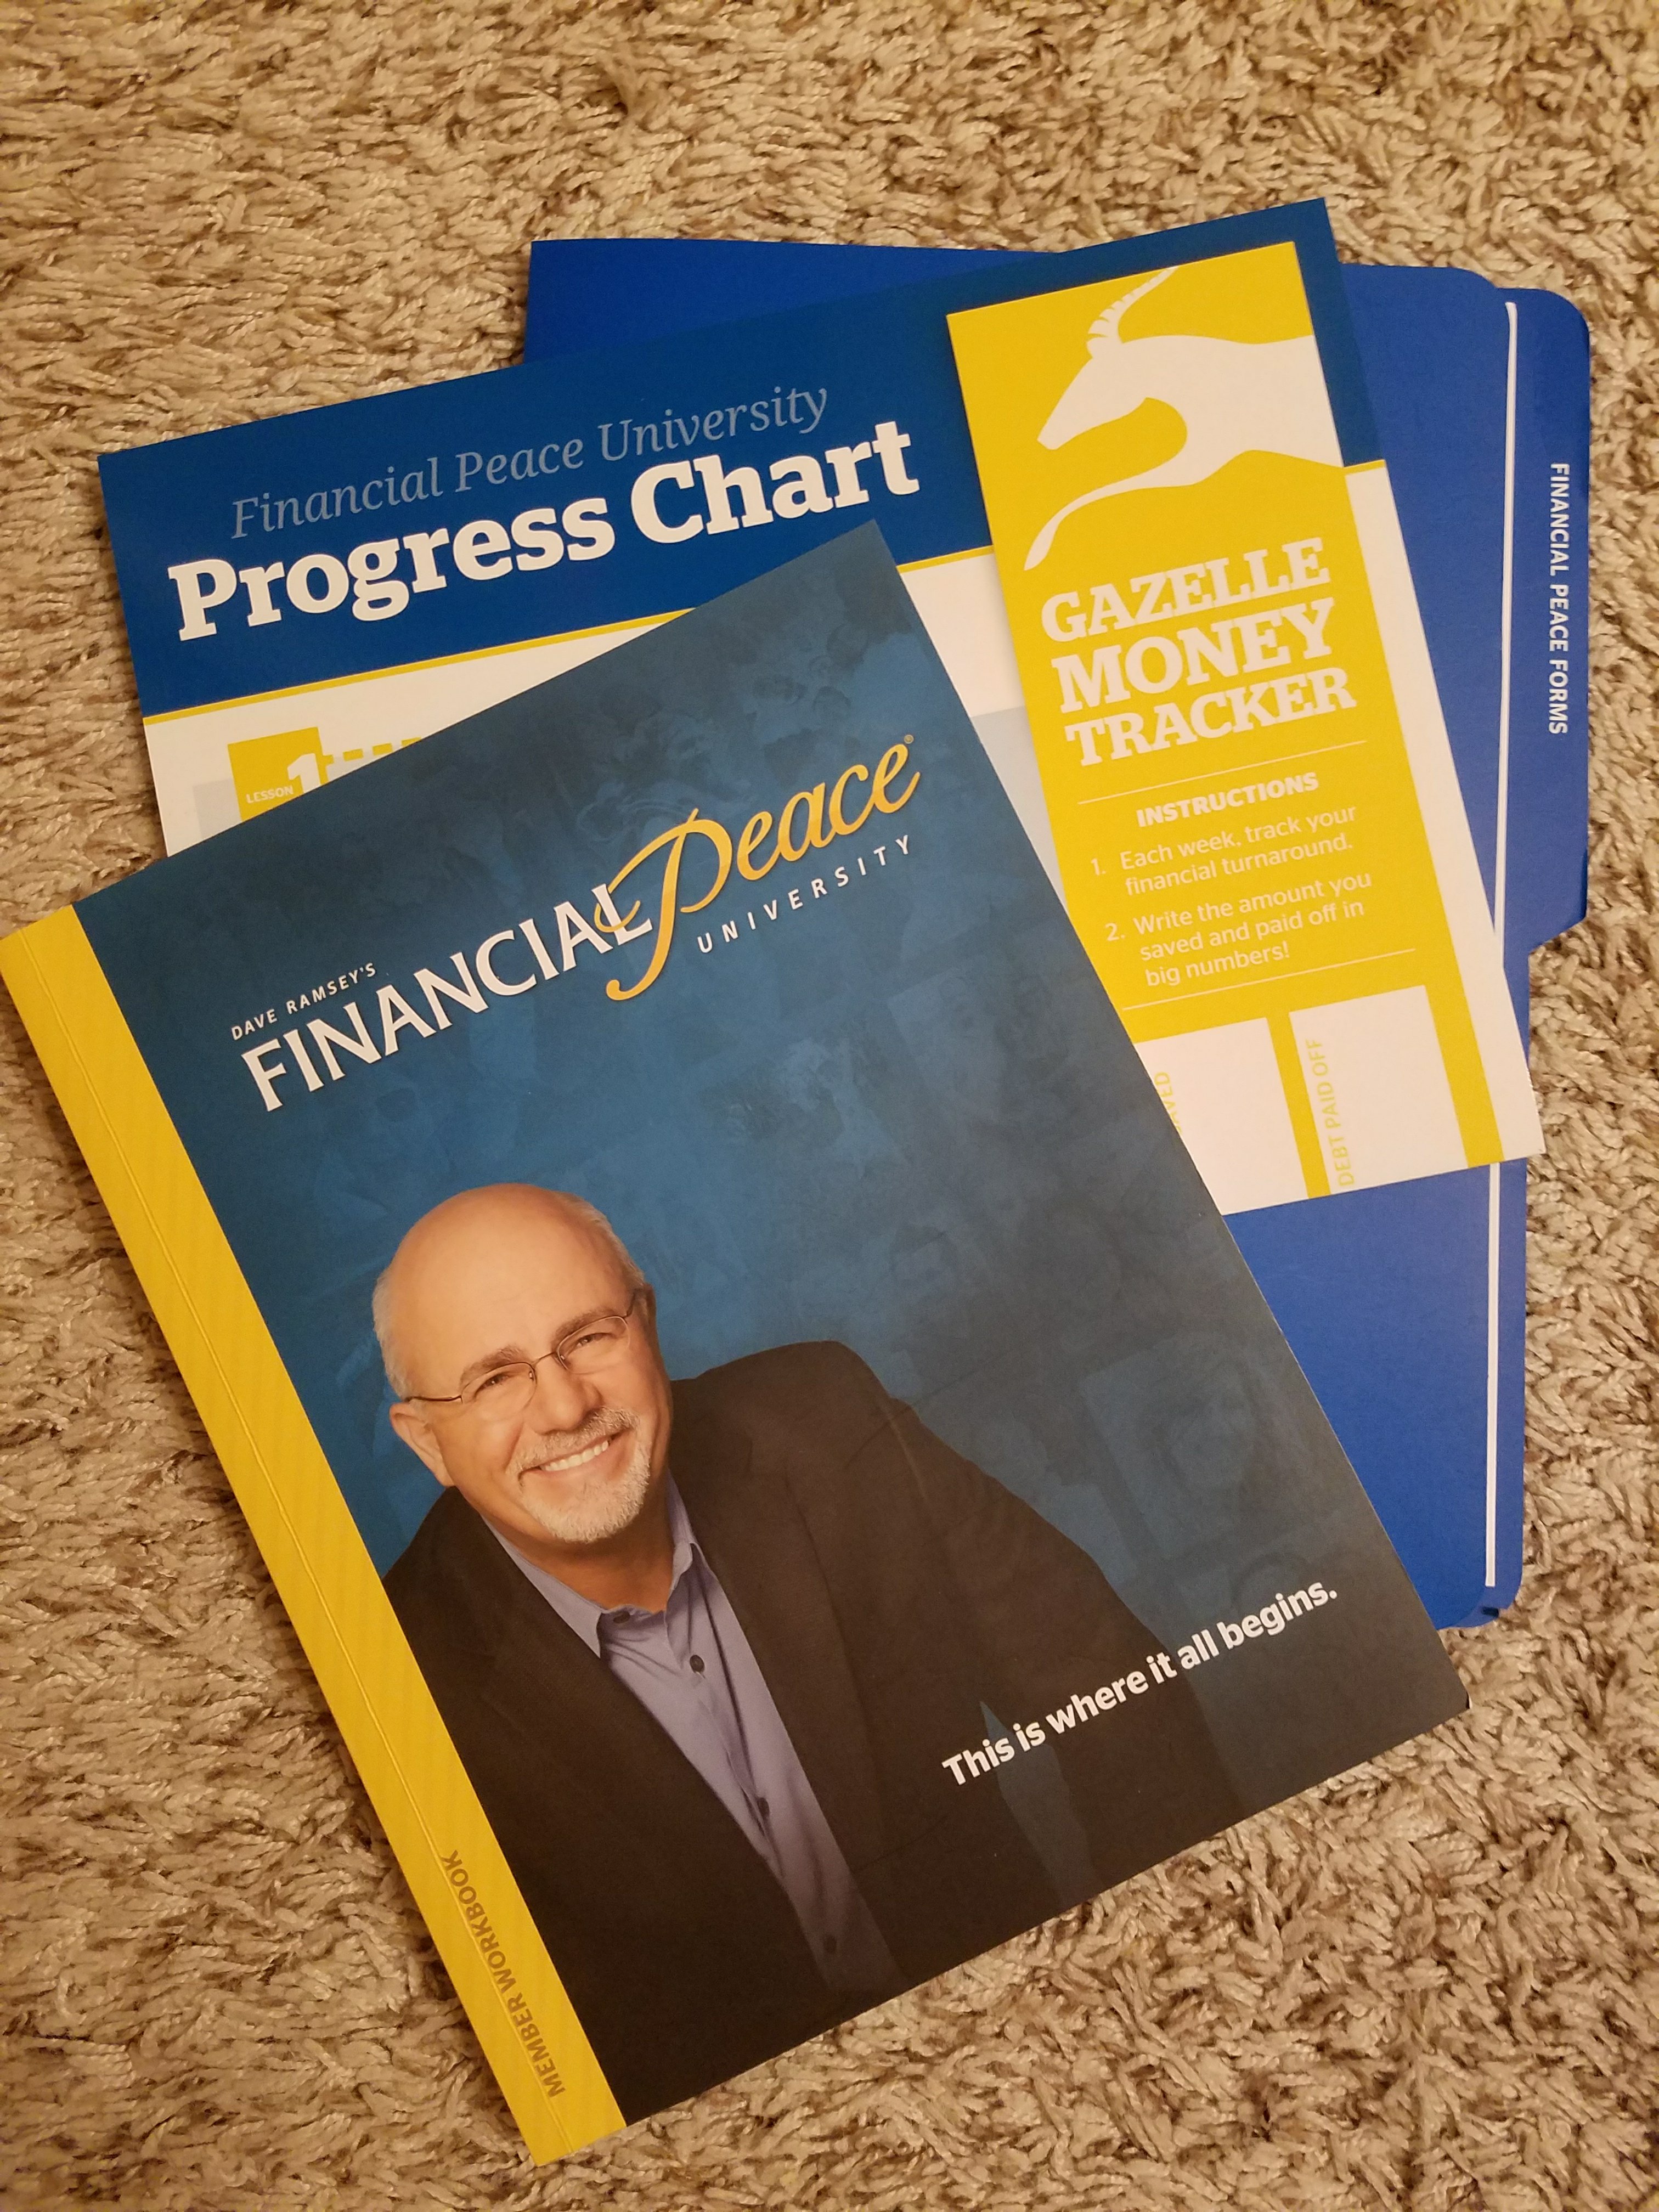 Dave Ramsey Financial Peace University materials